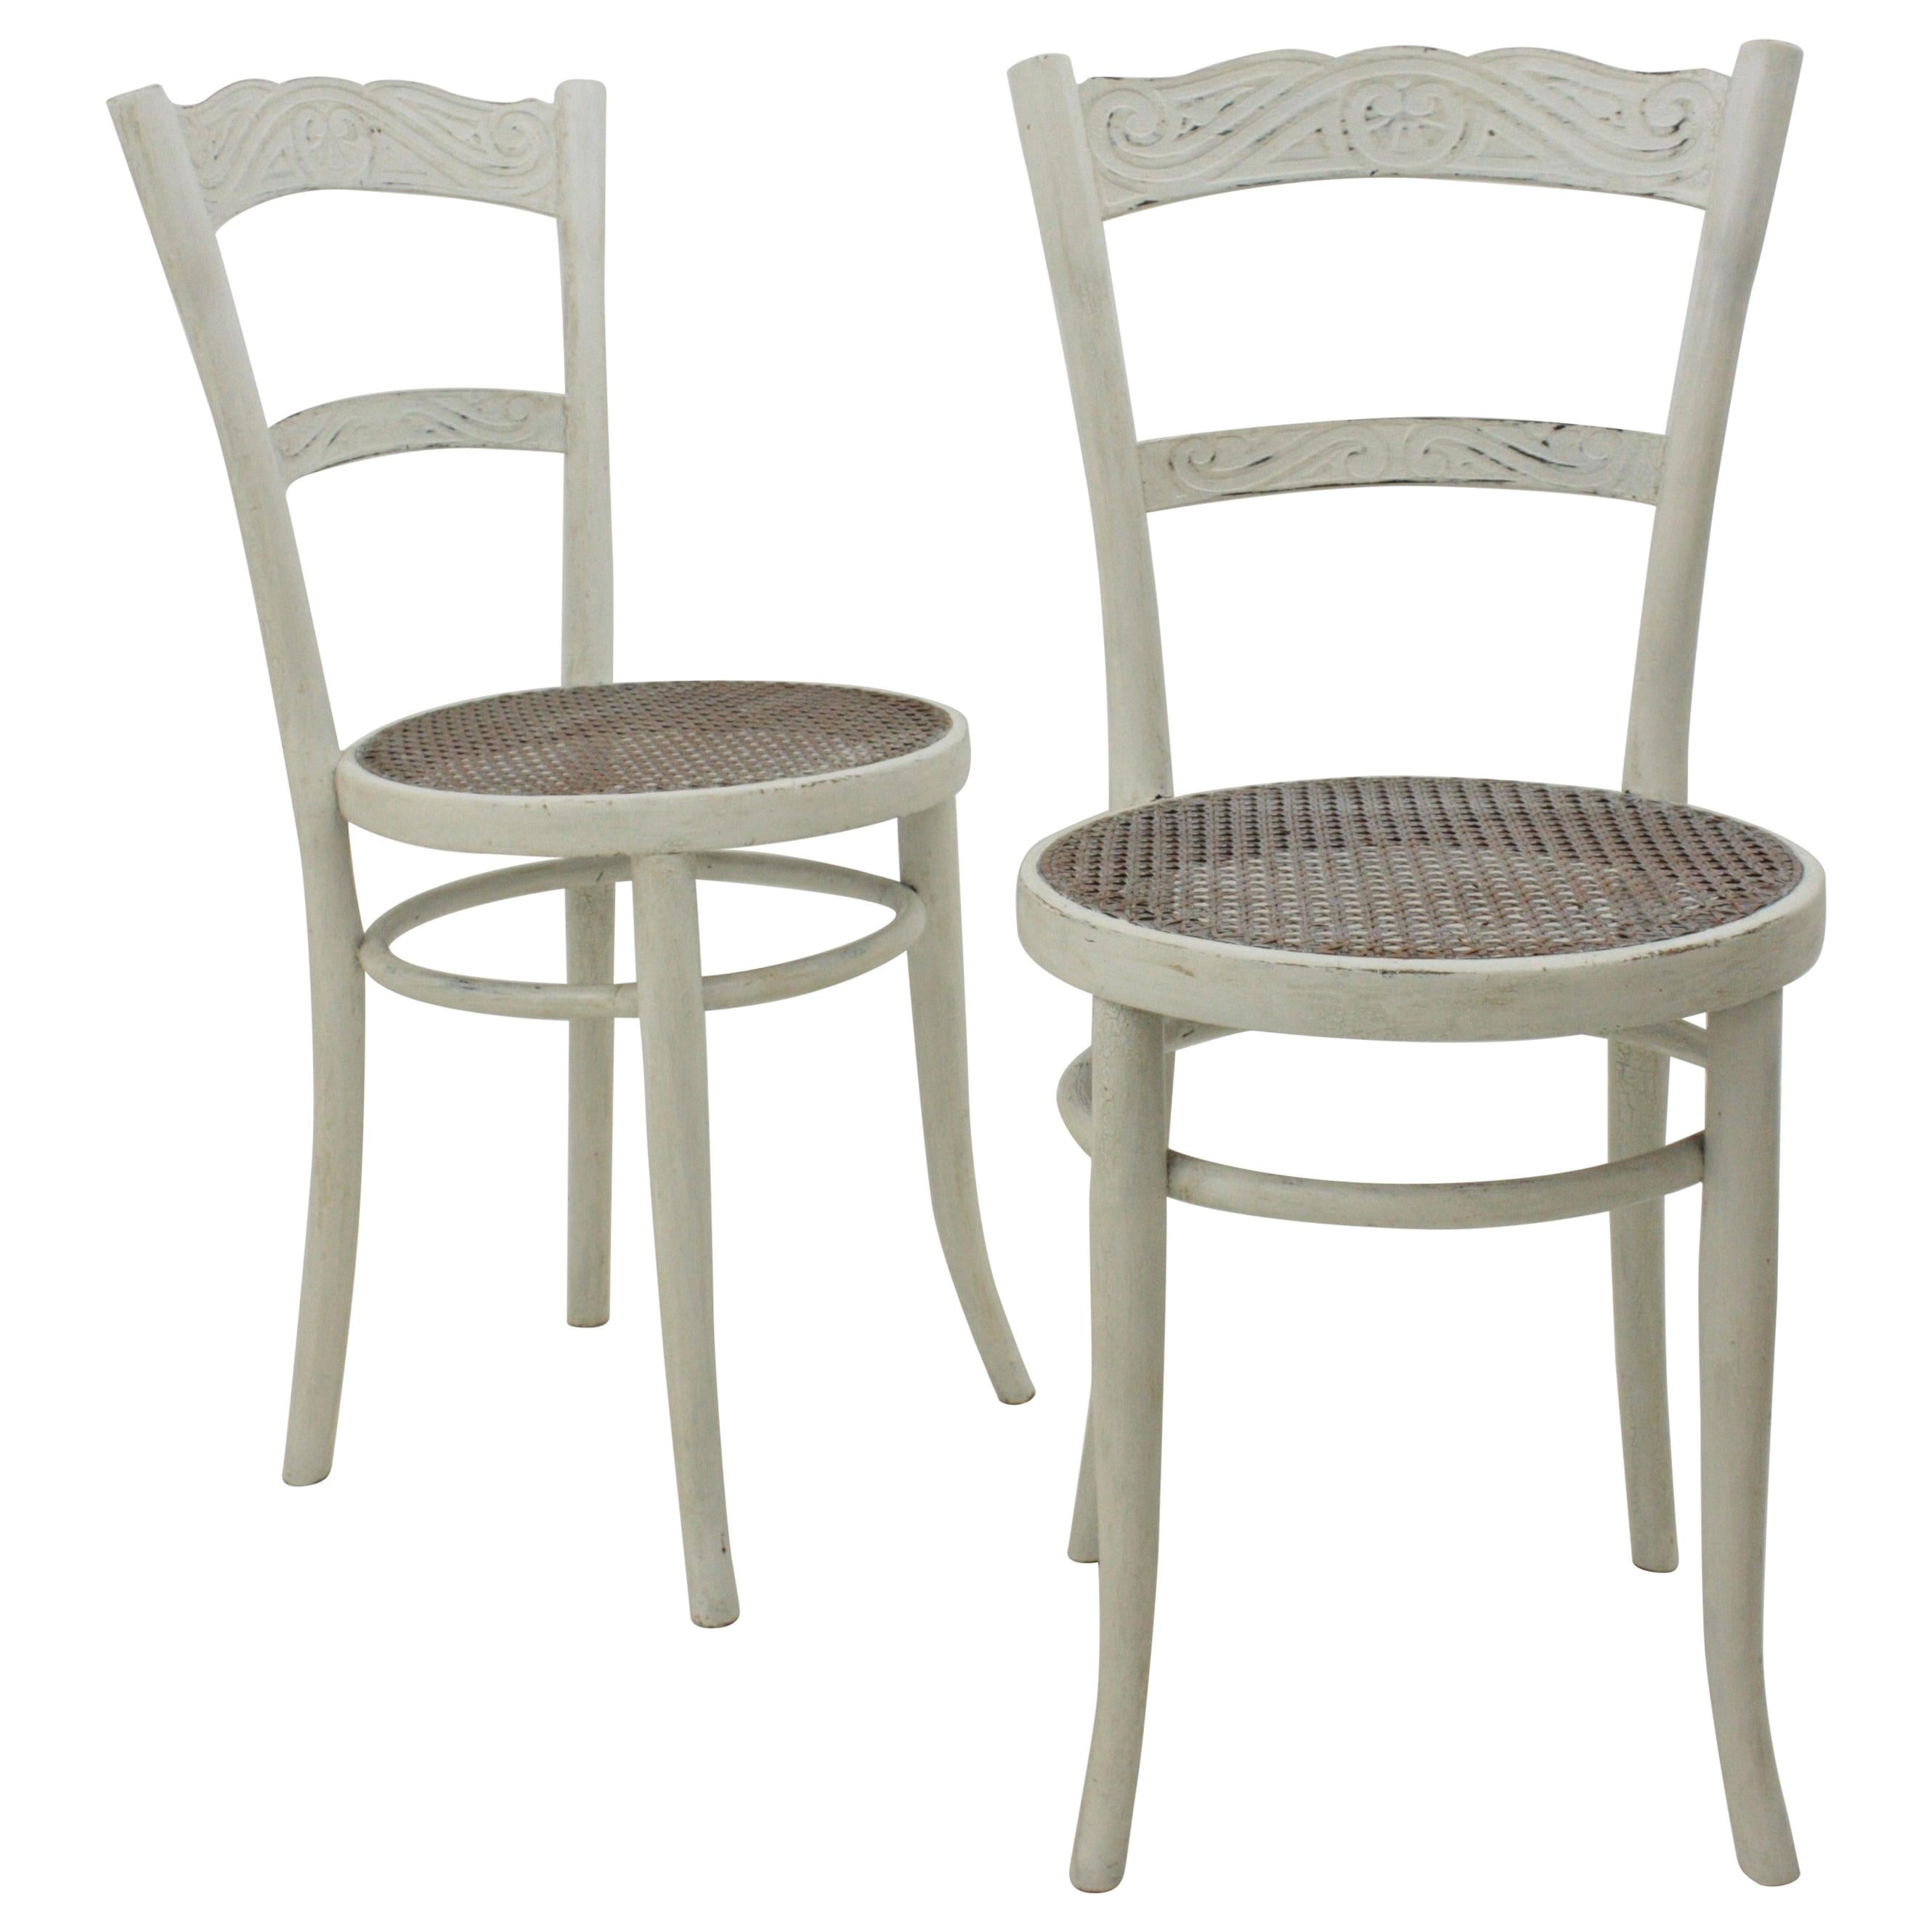 Jacob & Josef Kohn Vienna Secession Patinated Chairs with Wicker Seats, Pair For Sale